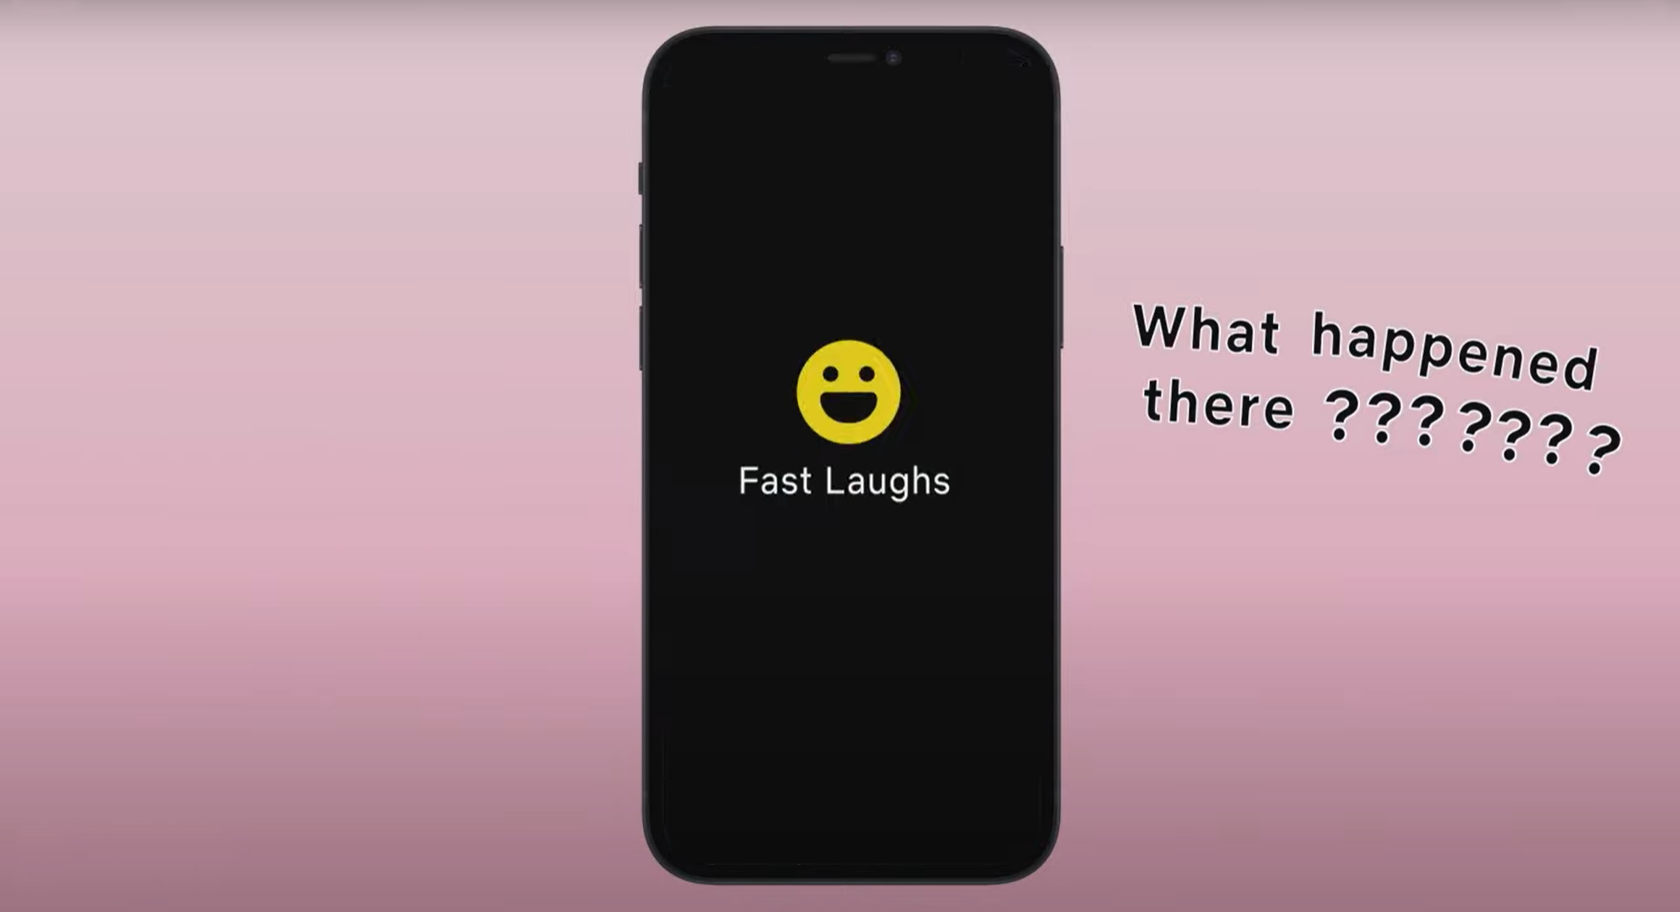 Netflix new add-on Fast Laughs looks like TikTok for funny video clips